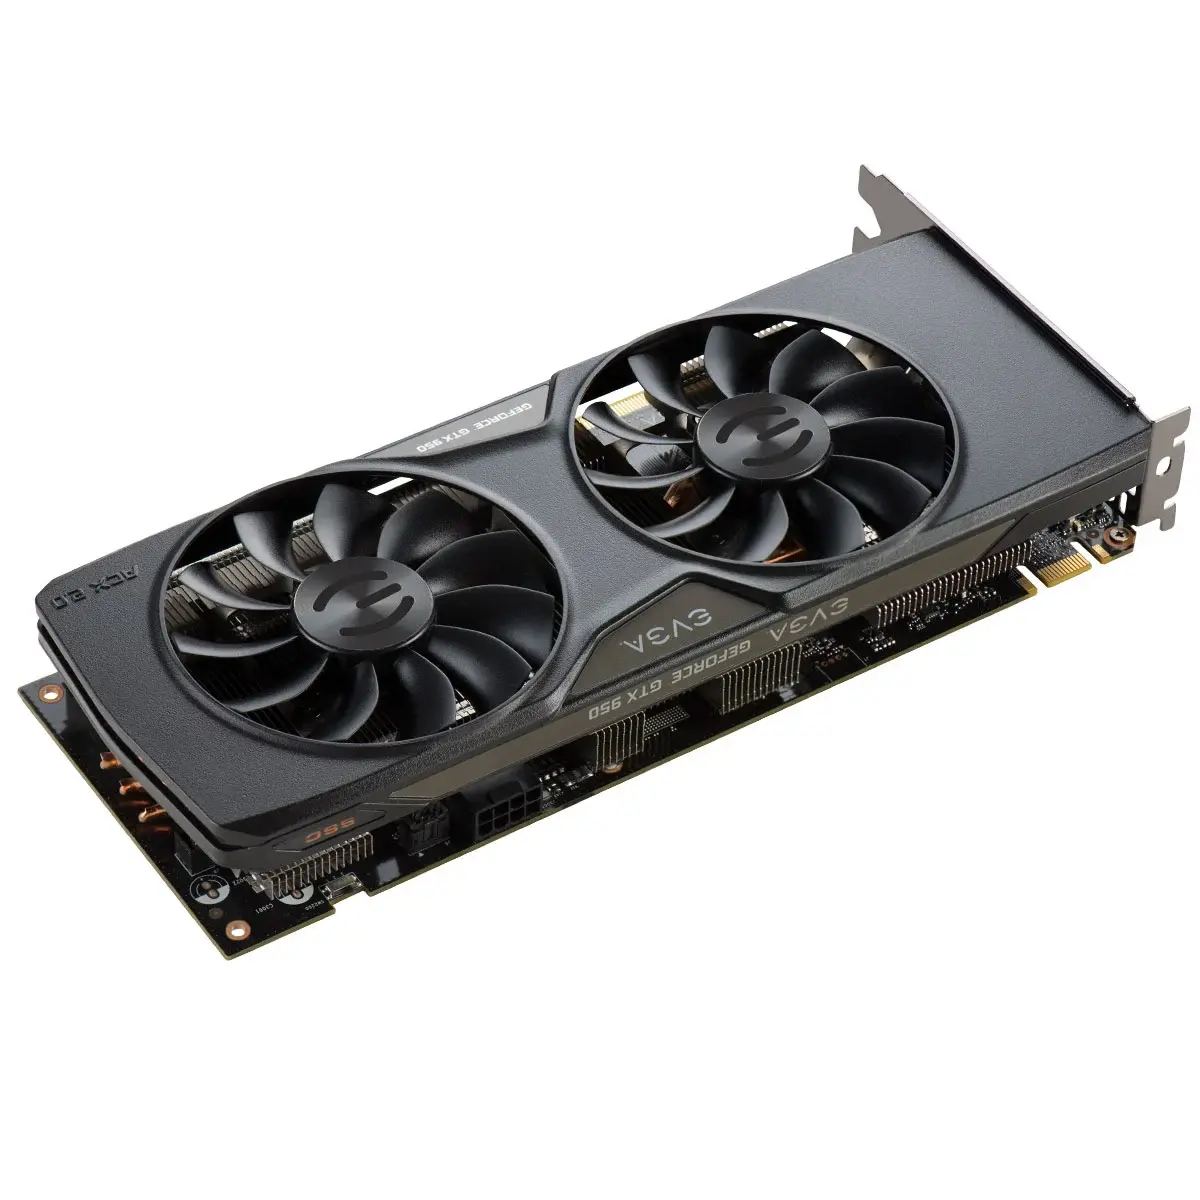 02G-P4-2957-KR EVGA GeForce GTX 950 2GB SSC Gaming, Silent Cooling Graphics Card